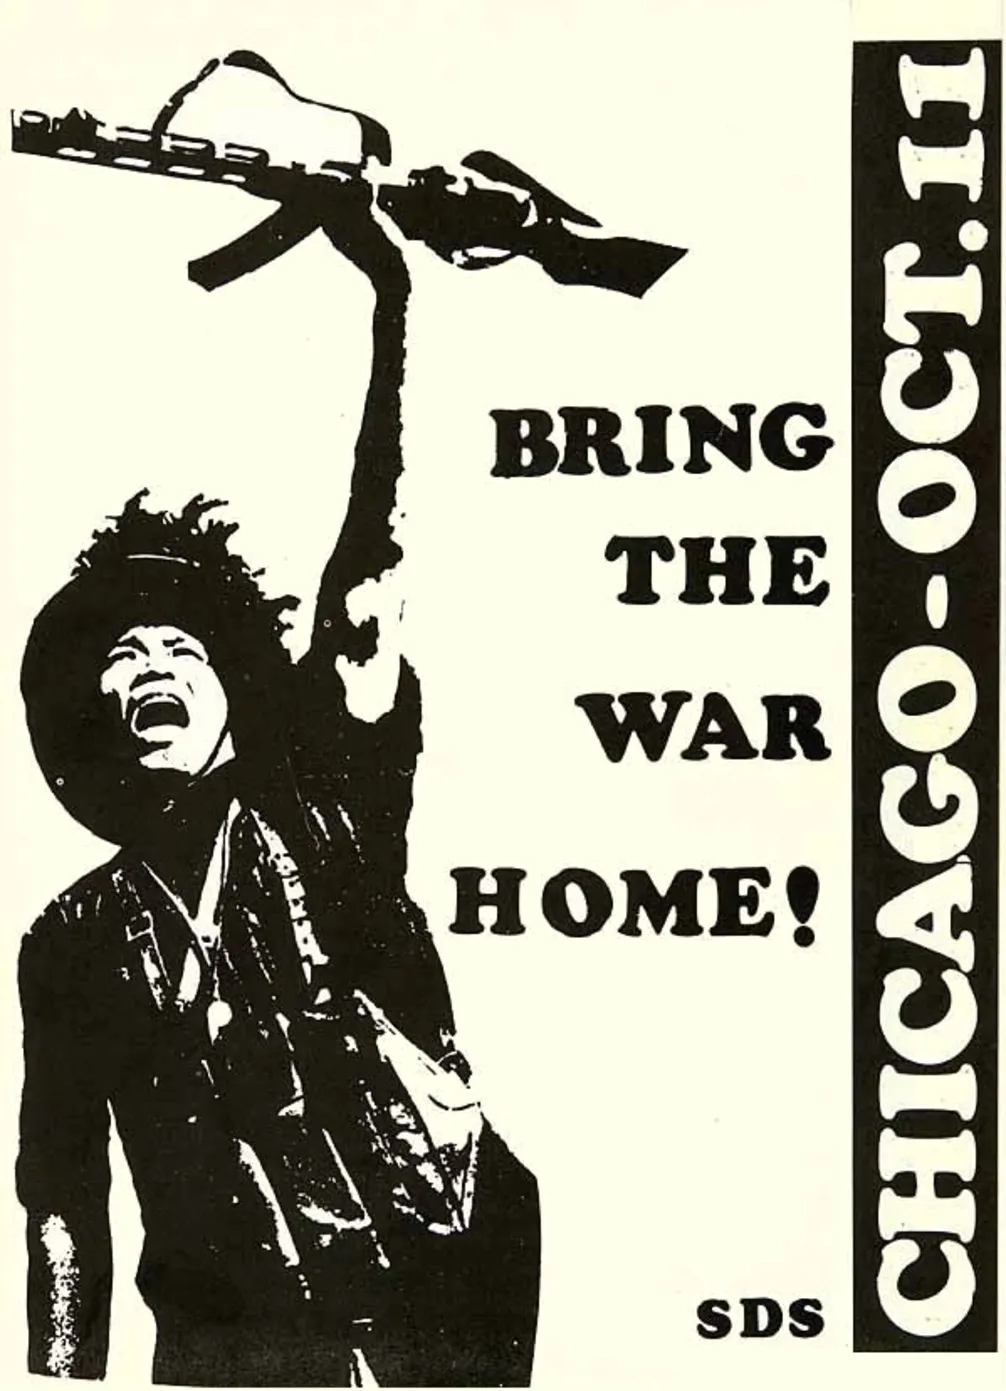 Poster from the 1969 Days of Rage demonstrations